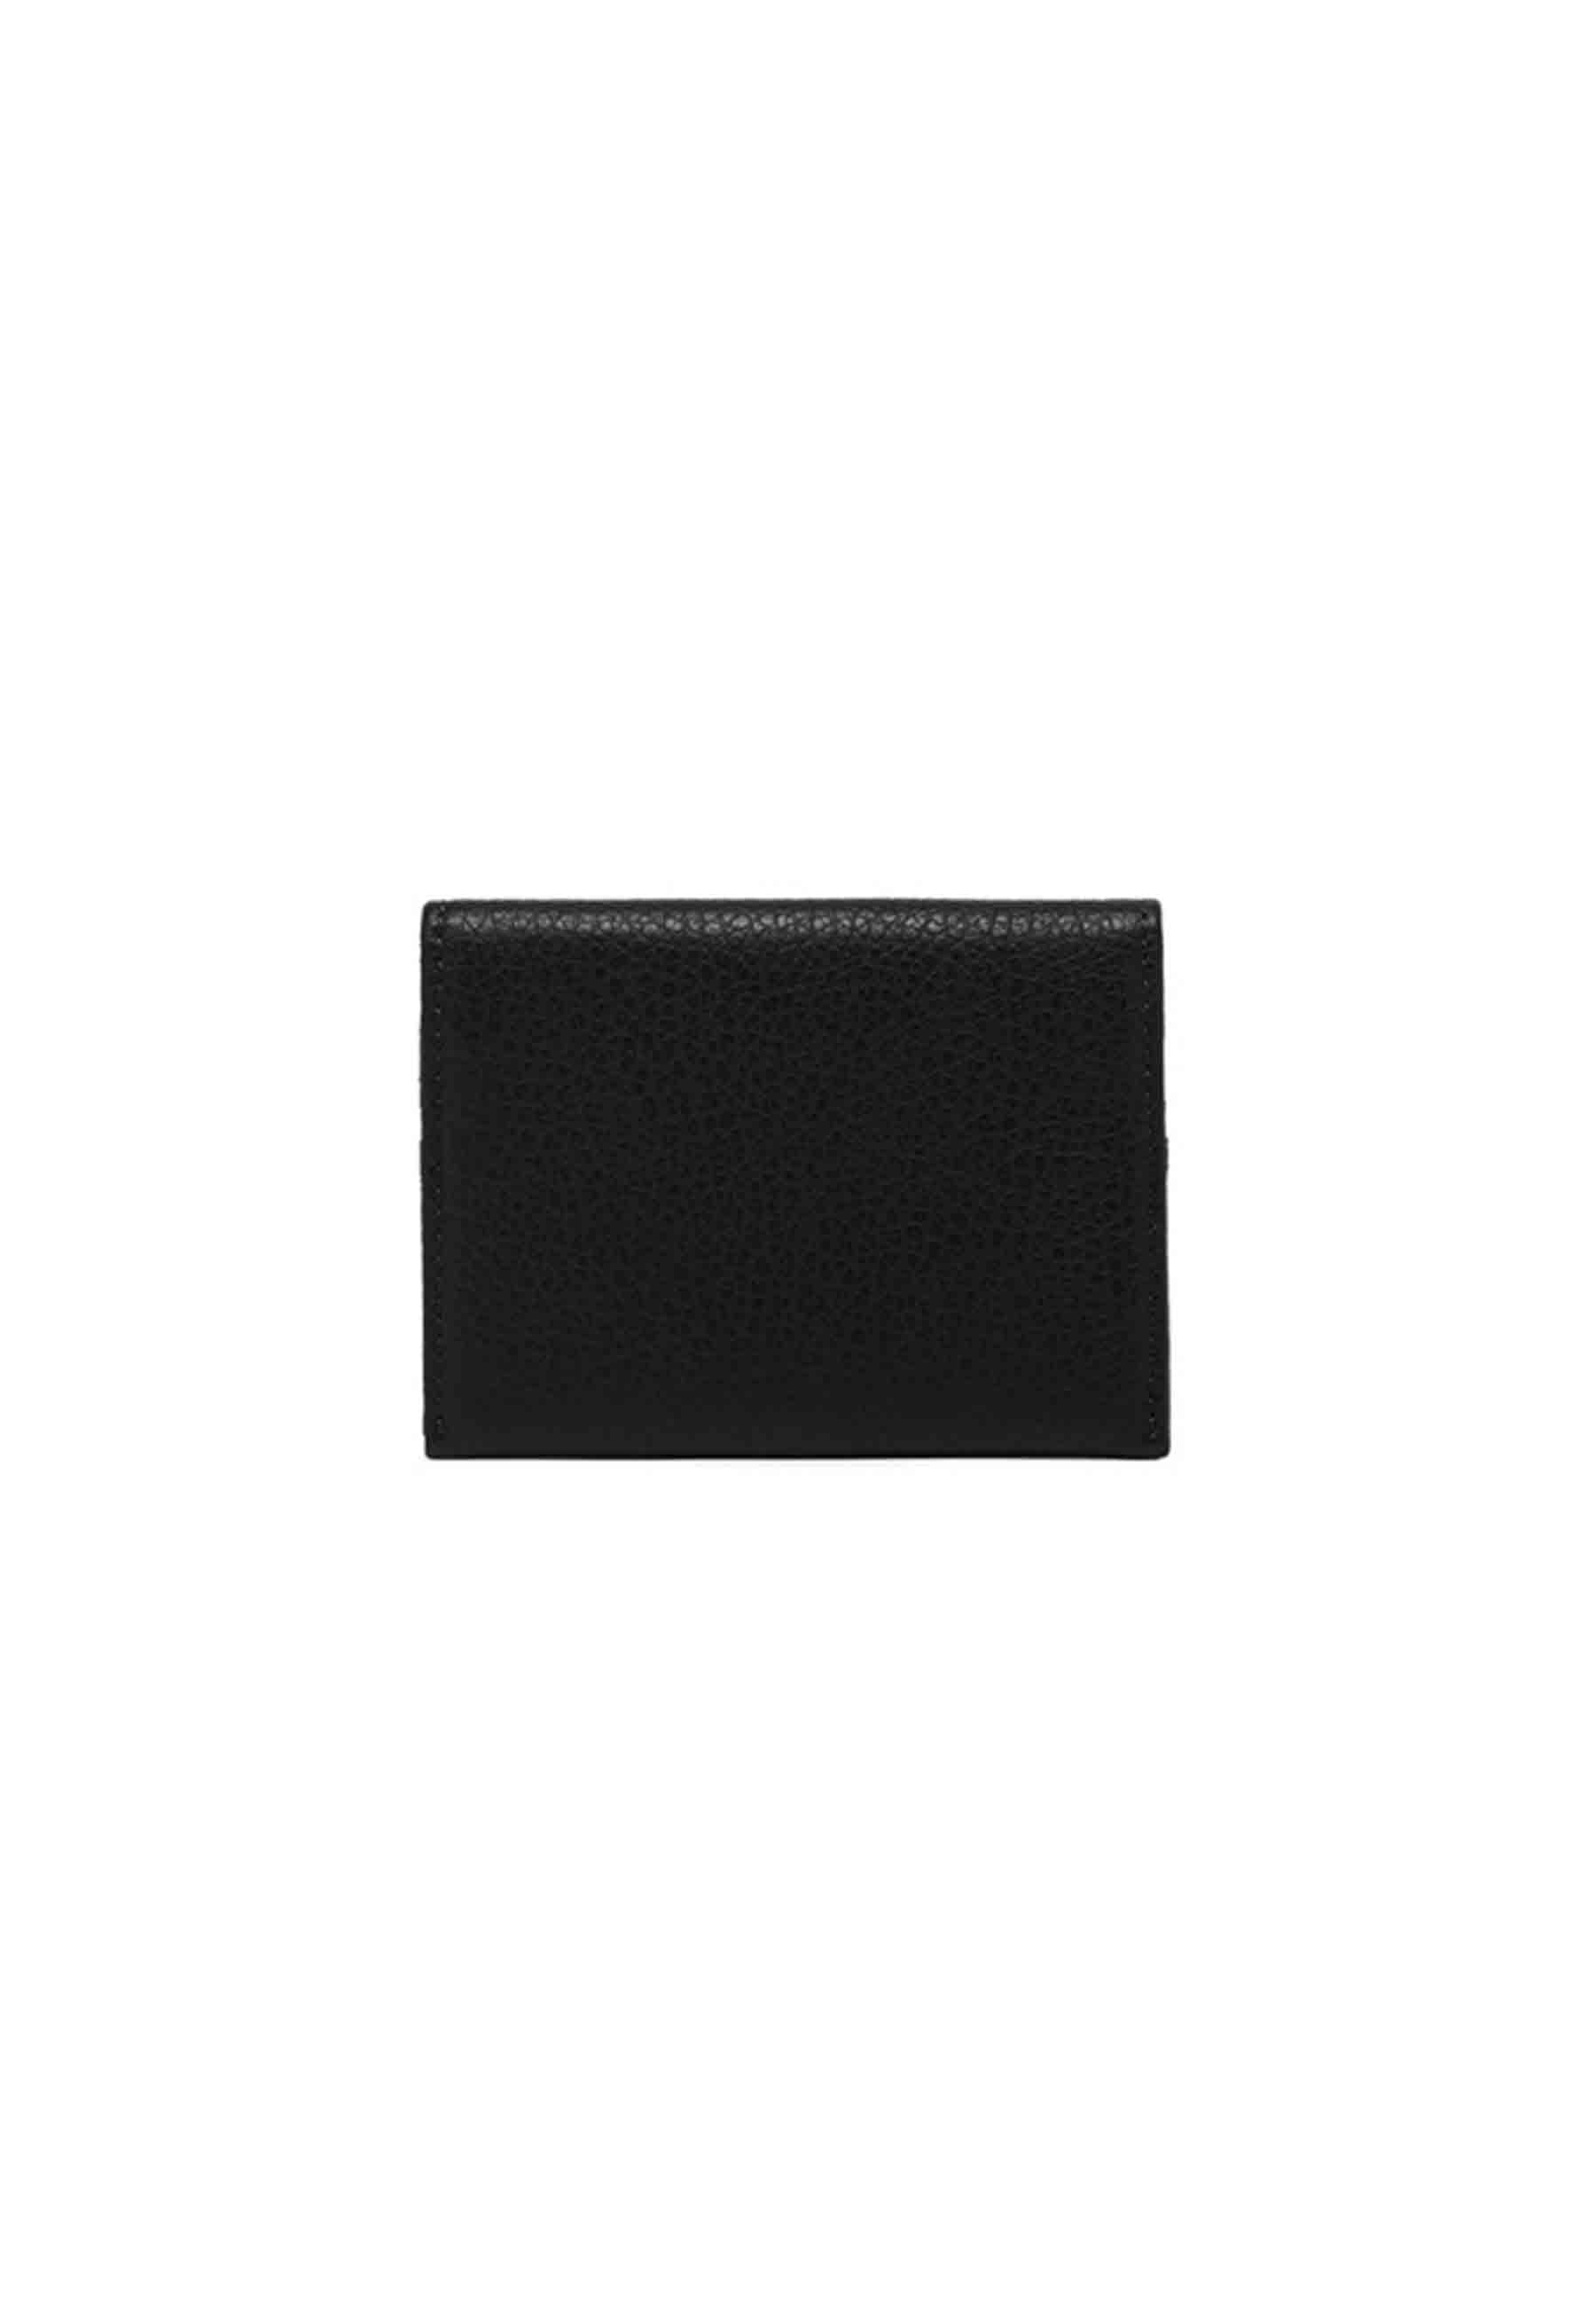 Women's card holder in black grained leather with button closure